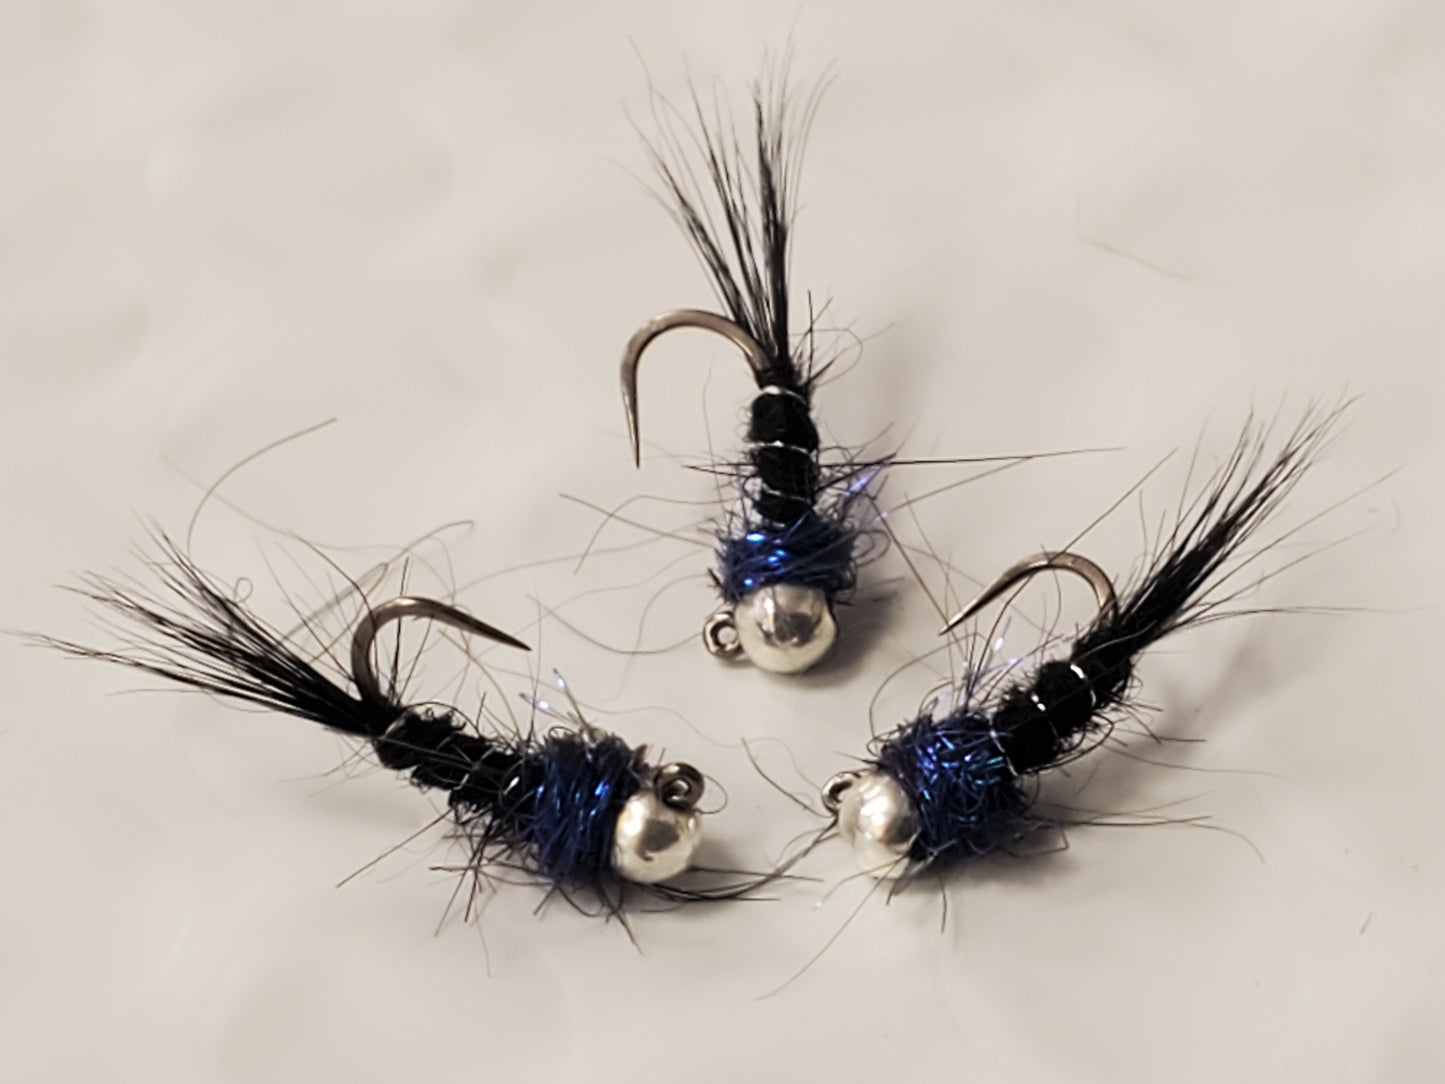 Trout Jig, Tungsten Bead Head Trout Jig, Trout Jig Nymph, Bead Head Nymph, Trout Jig Black and Blue Stonefly